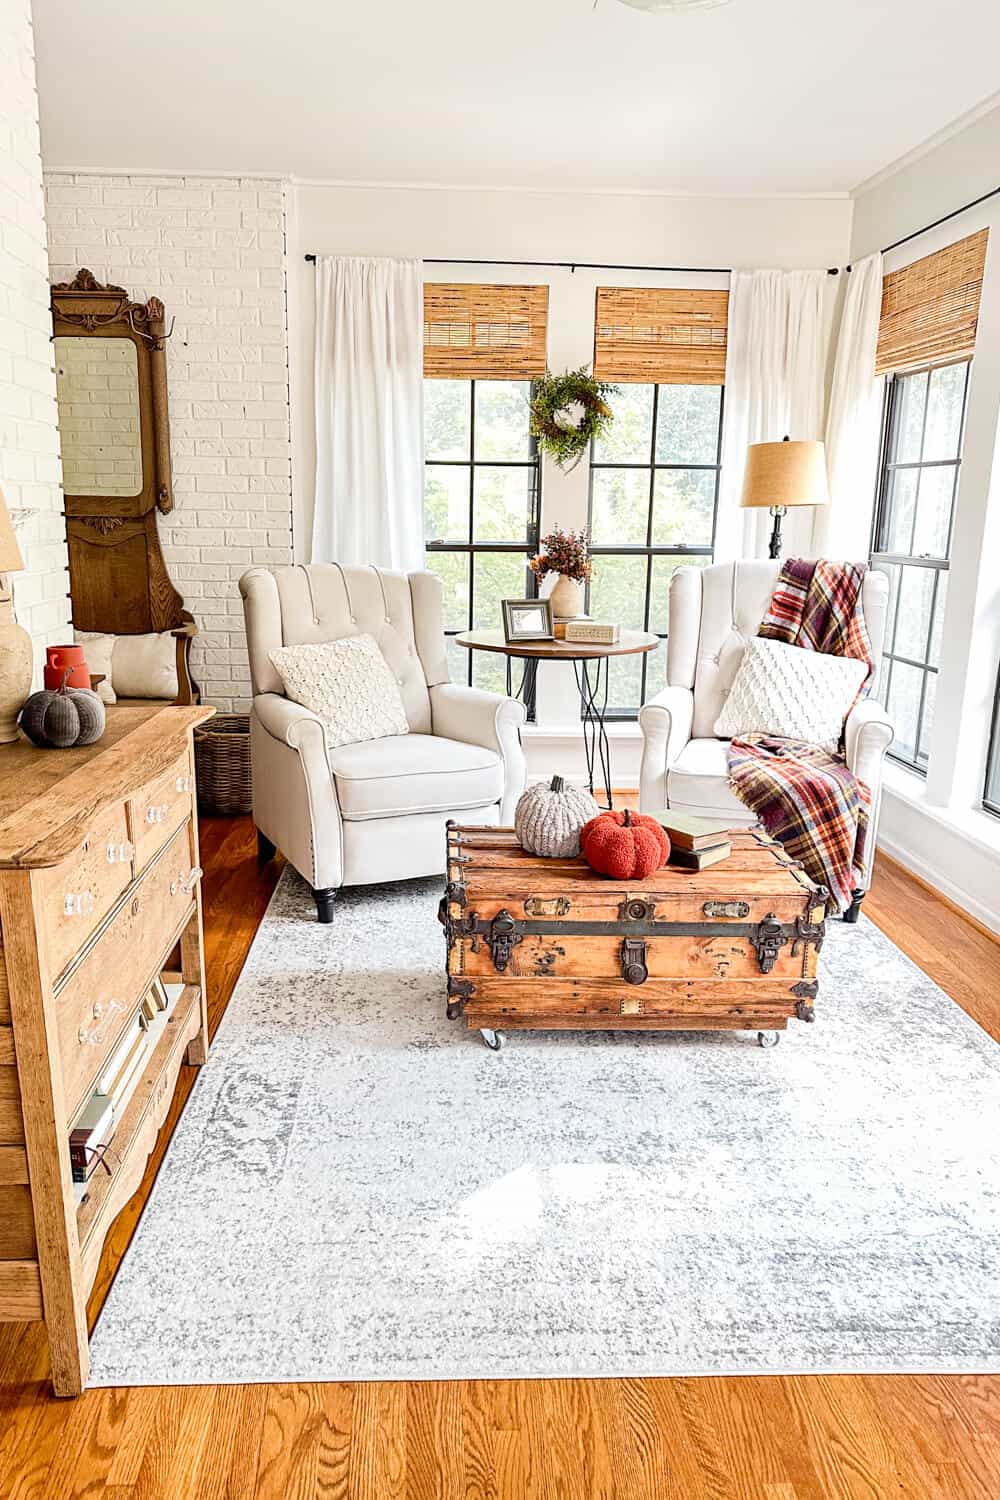 Pair of wingback armchairs in front of black windows and and old trunk for a coffee table decorated with minimal fall decor